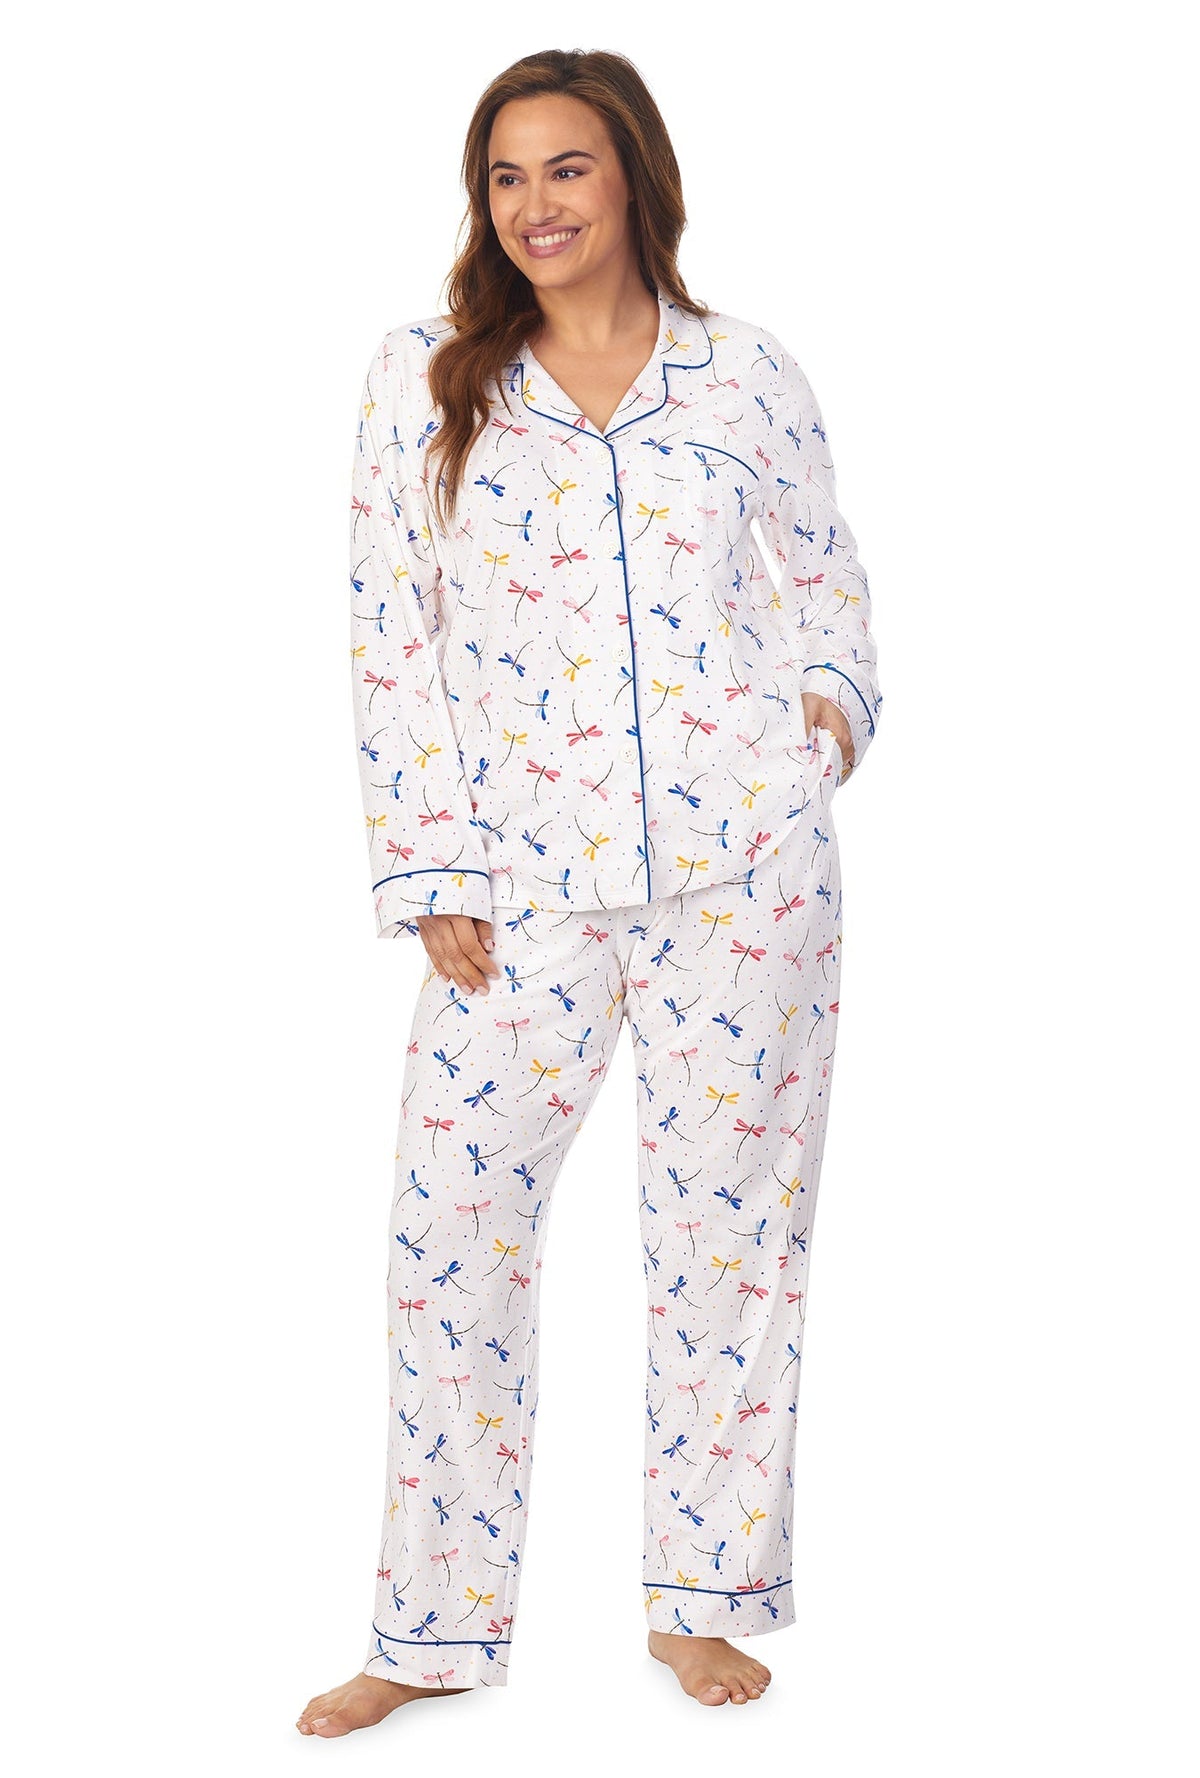 A lady wearing a white long sleeve plus size pj set with dragonfly pattern.